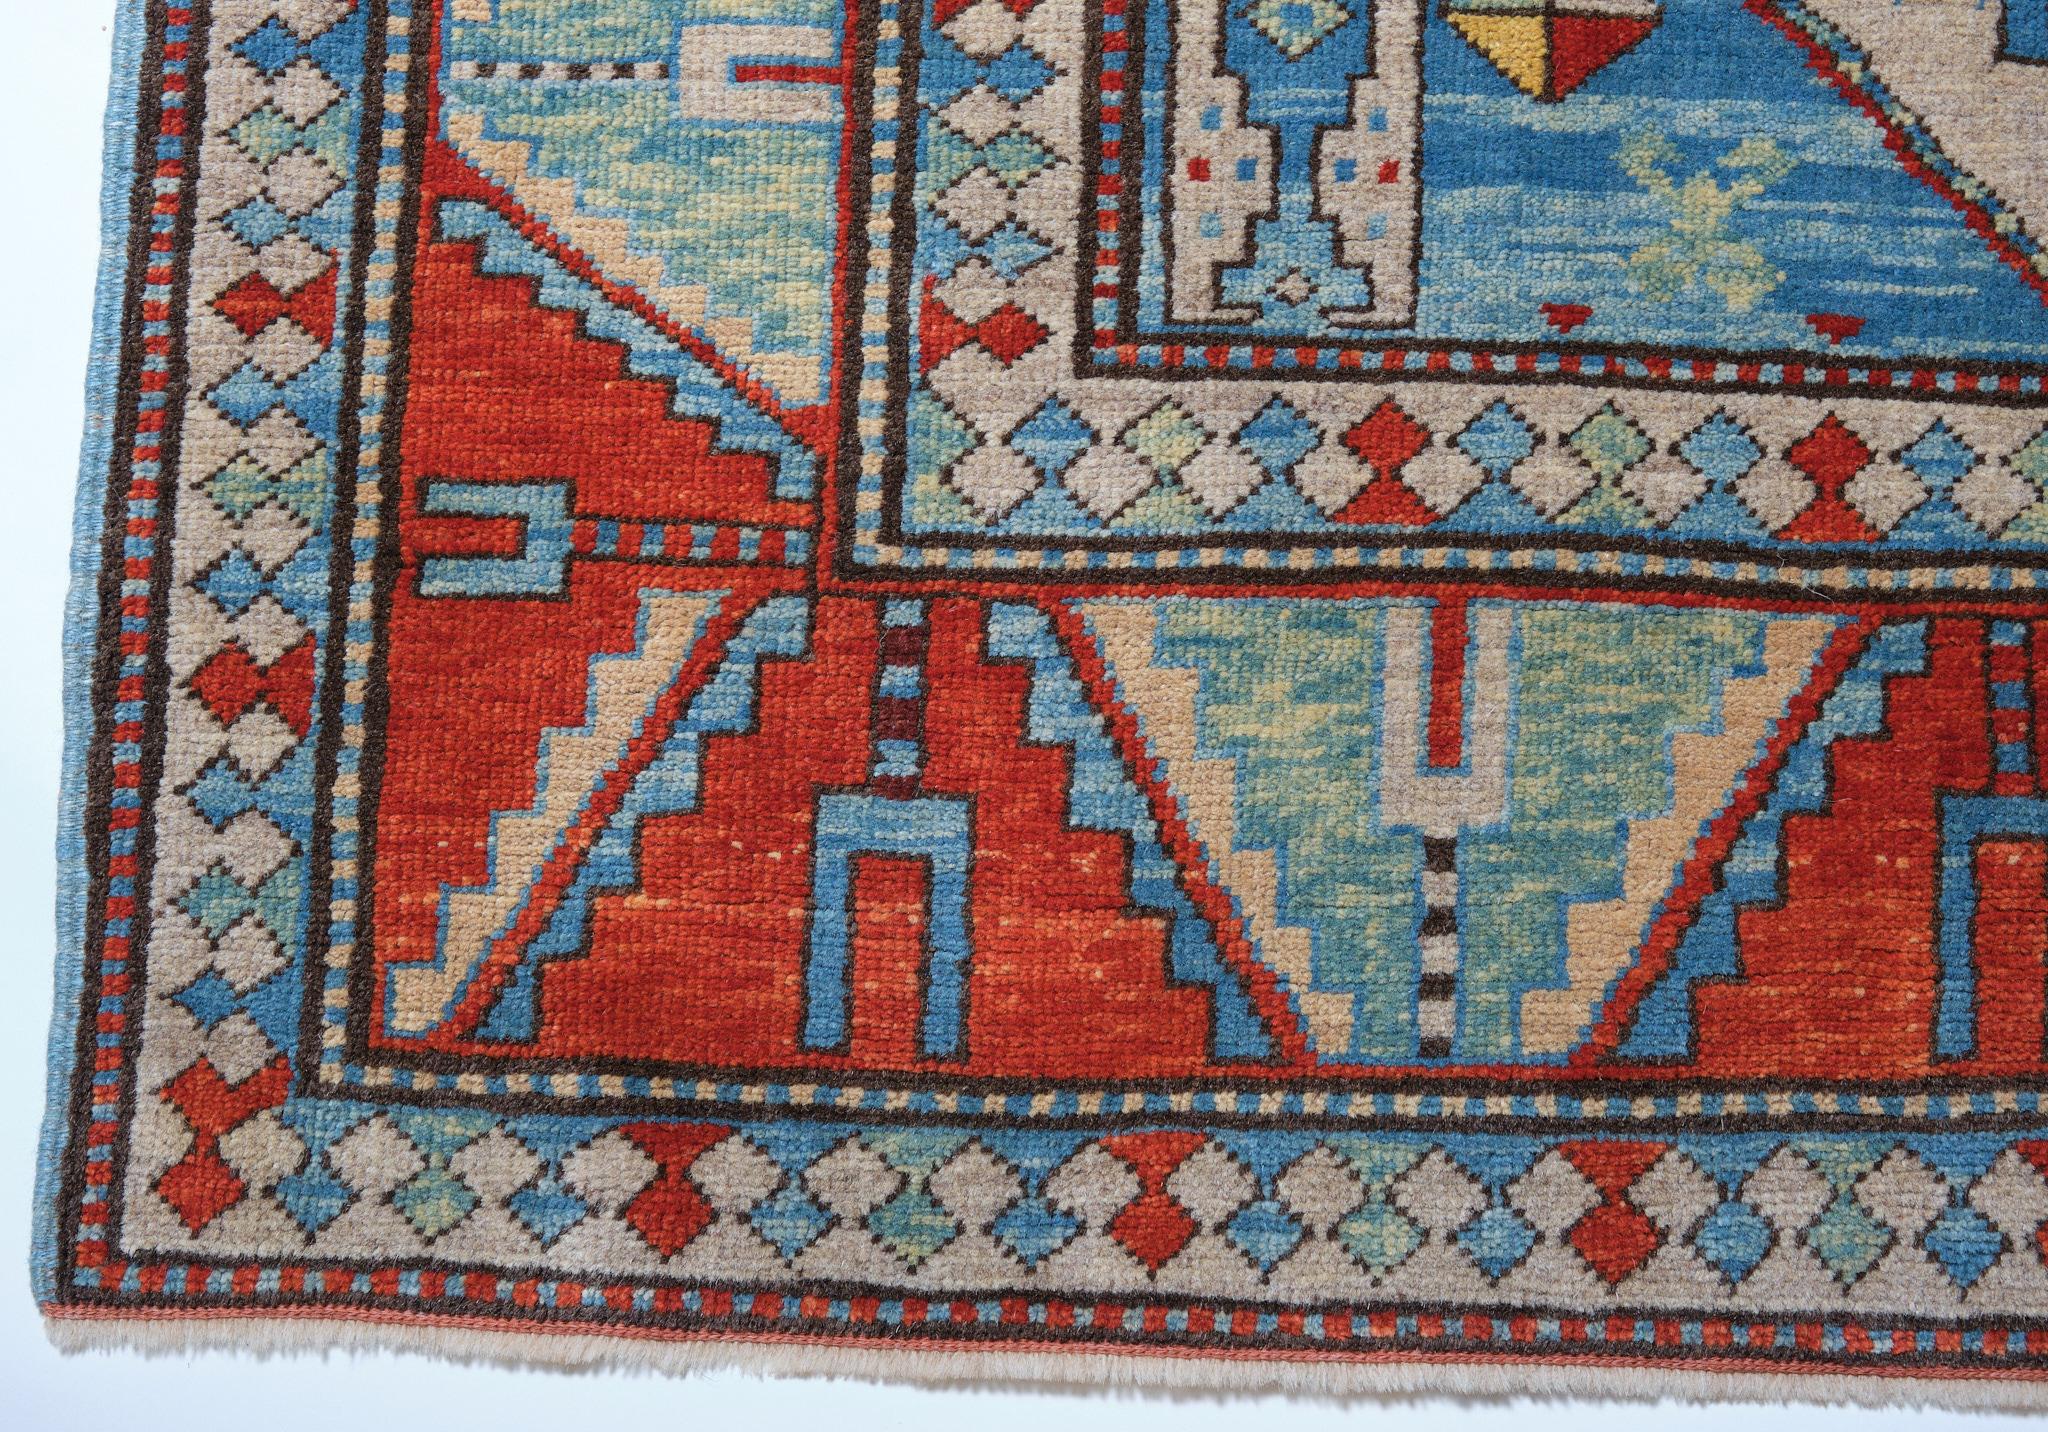 The source of the rug comes from the book Oriental rugs Volume 1 Caucasian, Ian Bennett, Oriental Textile Press, Aberdeen 1993, pg.24. This is a medallion rug from the late 19th century, Lori-Pambak region, Caucasus area. Lori-Pambak, a village in